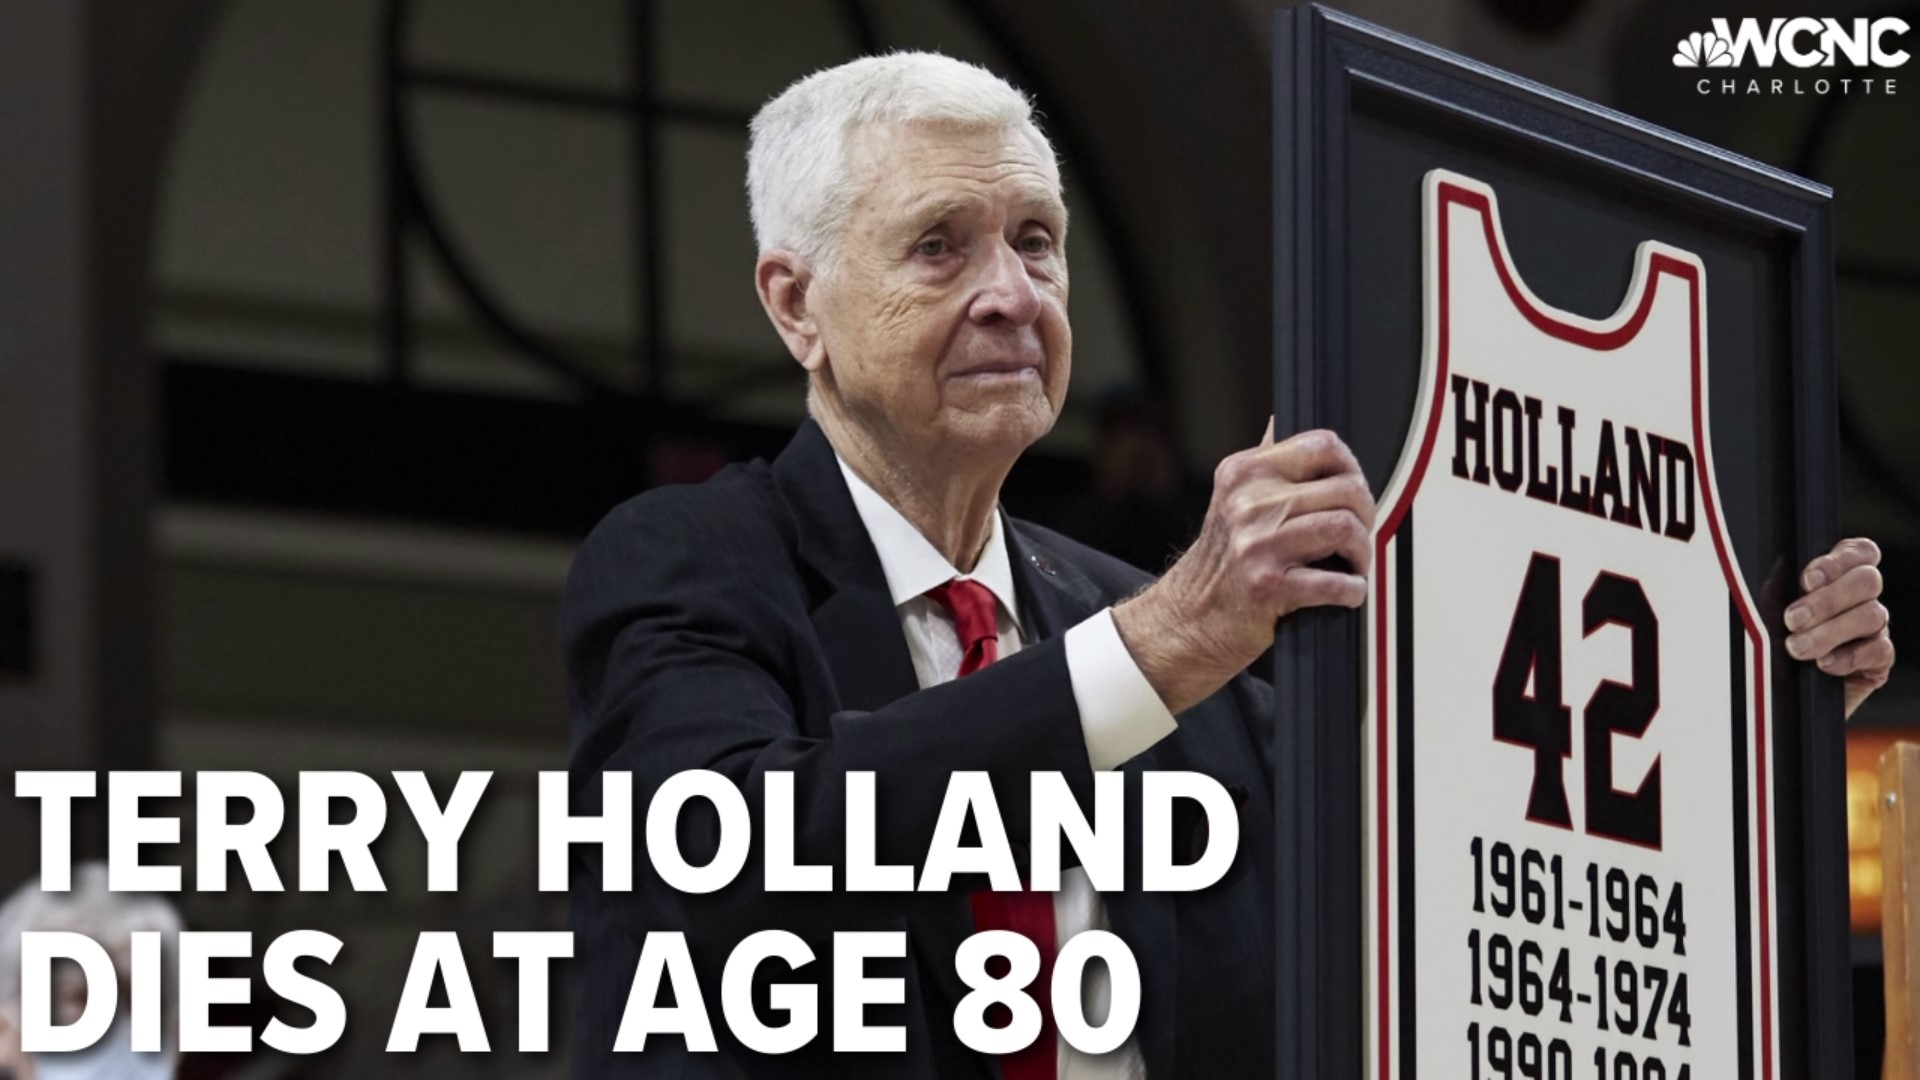 Former Davidson player, coach and athletics director Terry Holland has passed away at 80.